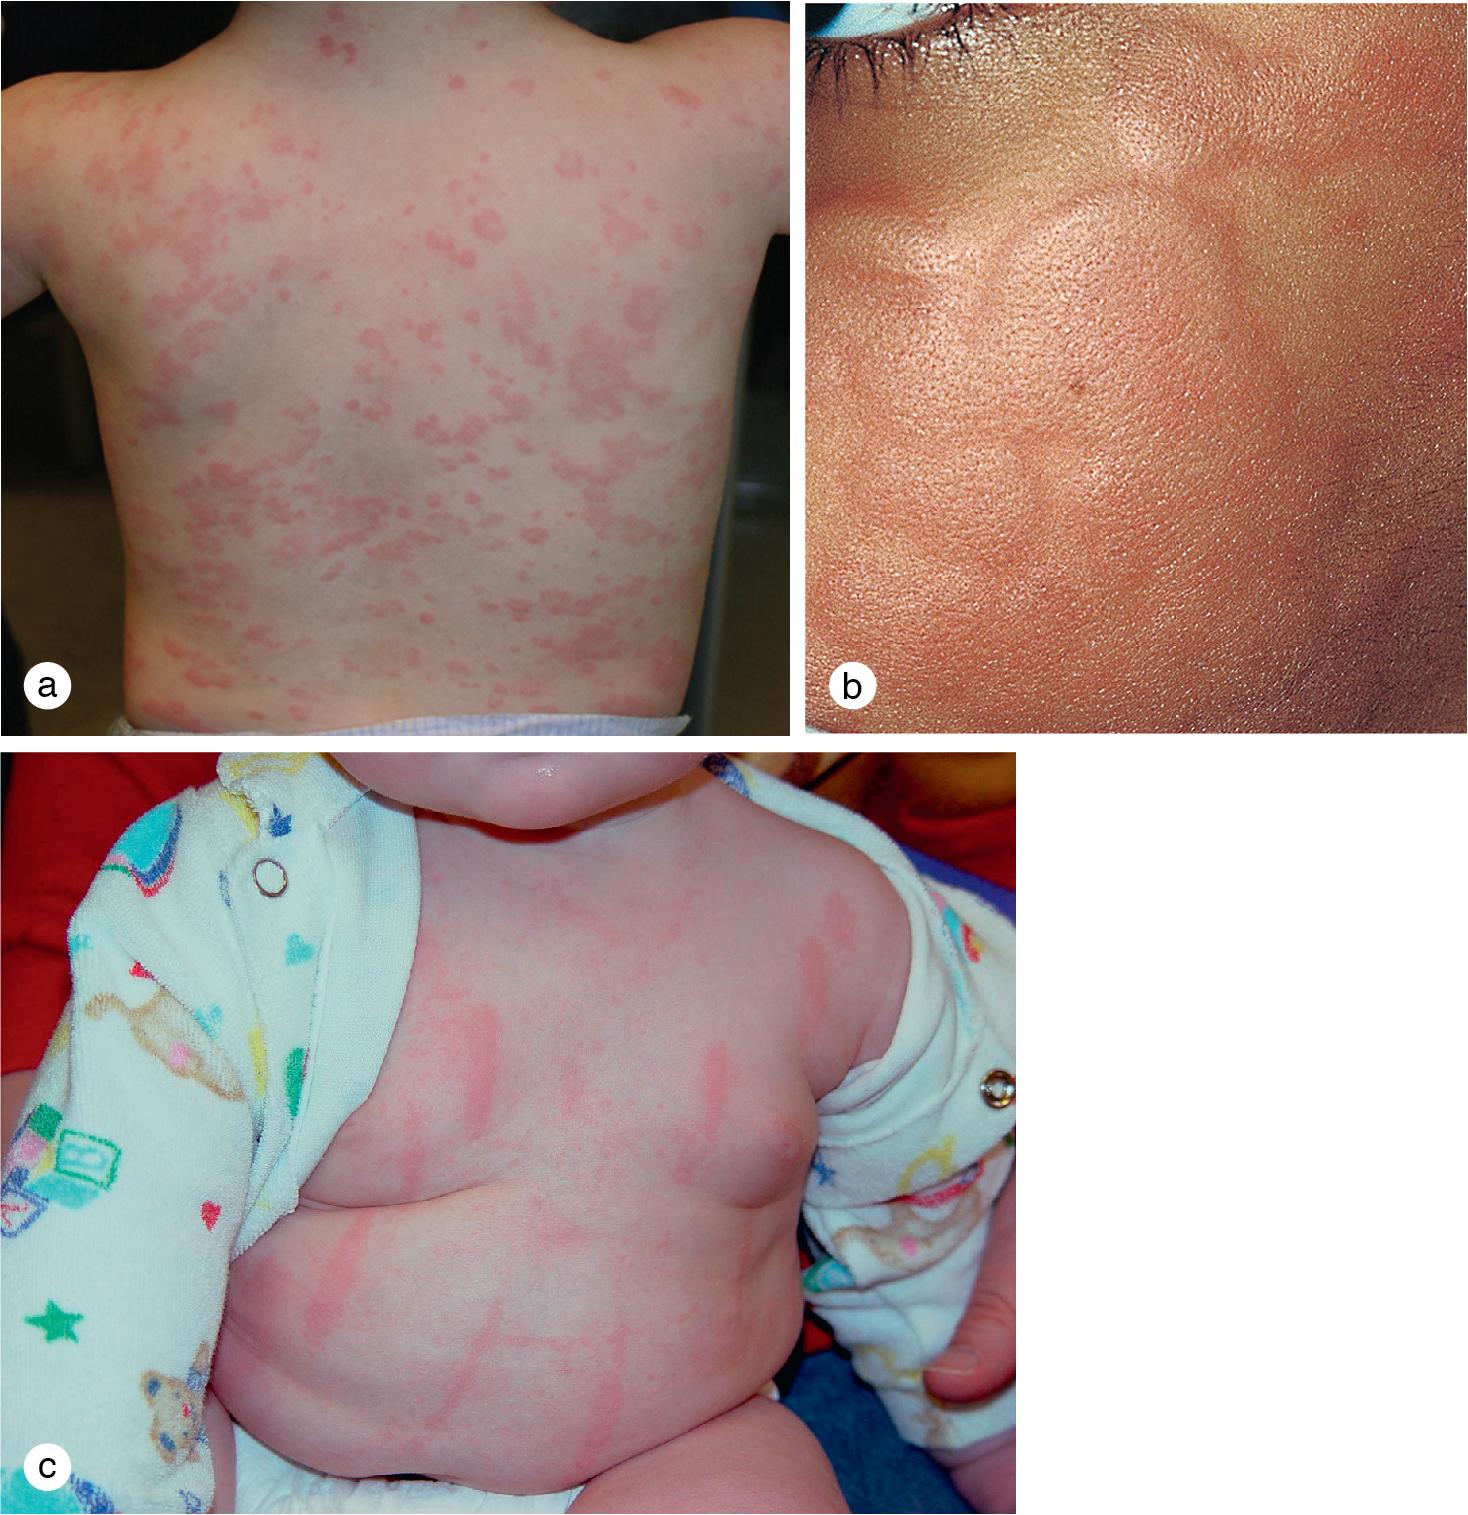 Fig. 7.5, Urticaria. (a) Pruritic papules and annular plaques recurred on the trunk and extremities of a toddler with chronic urticarial. (b) Wheals have become confluent on the face of this boy. (c) This infant developed recurrent urticaria and dermatographism, demonstrated here by vertical linear red plaques with surrounding pallor.